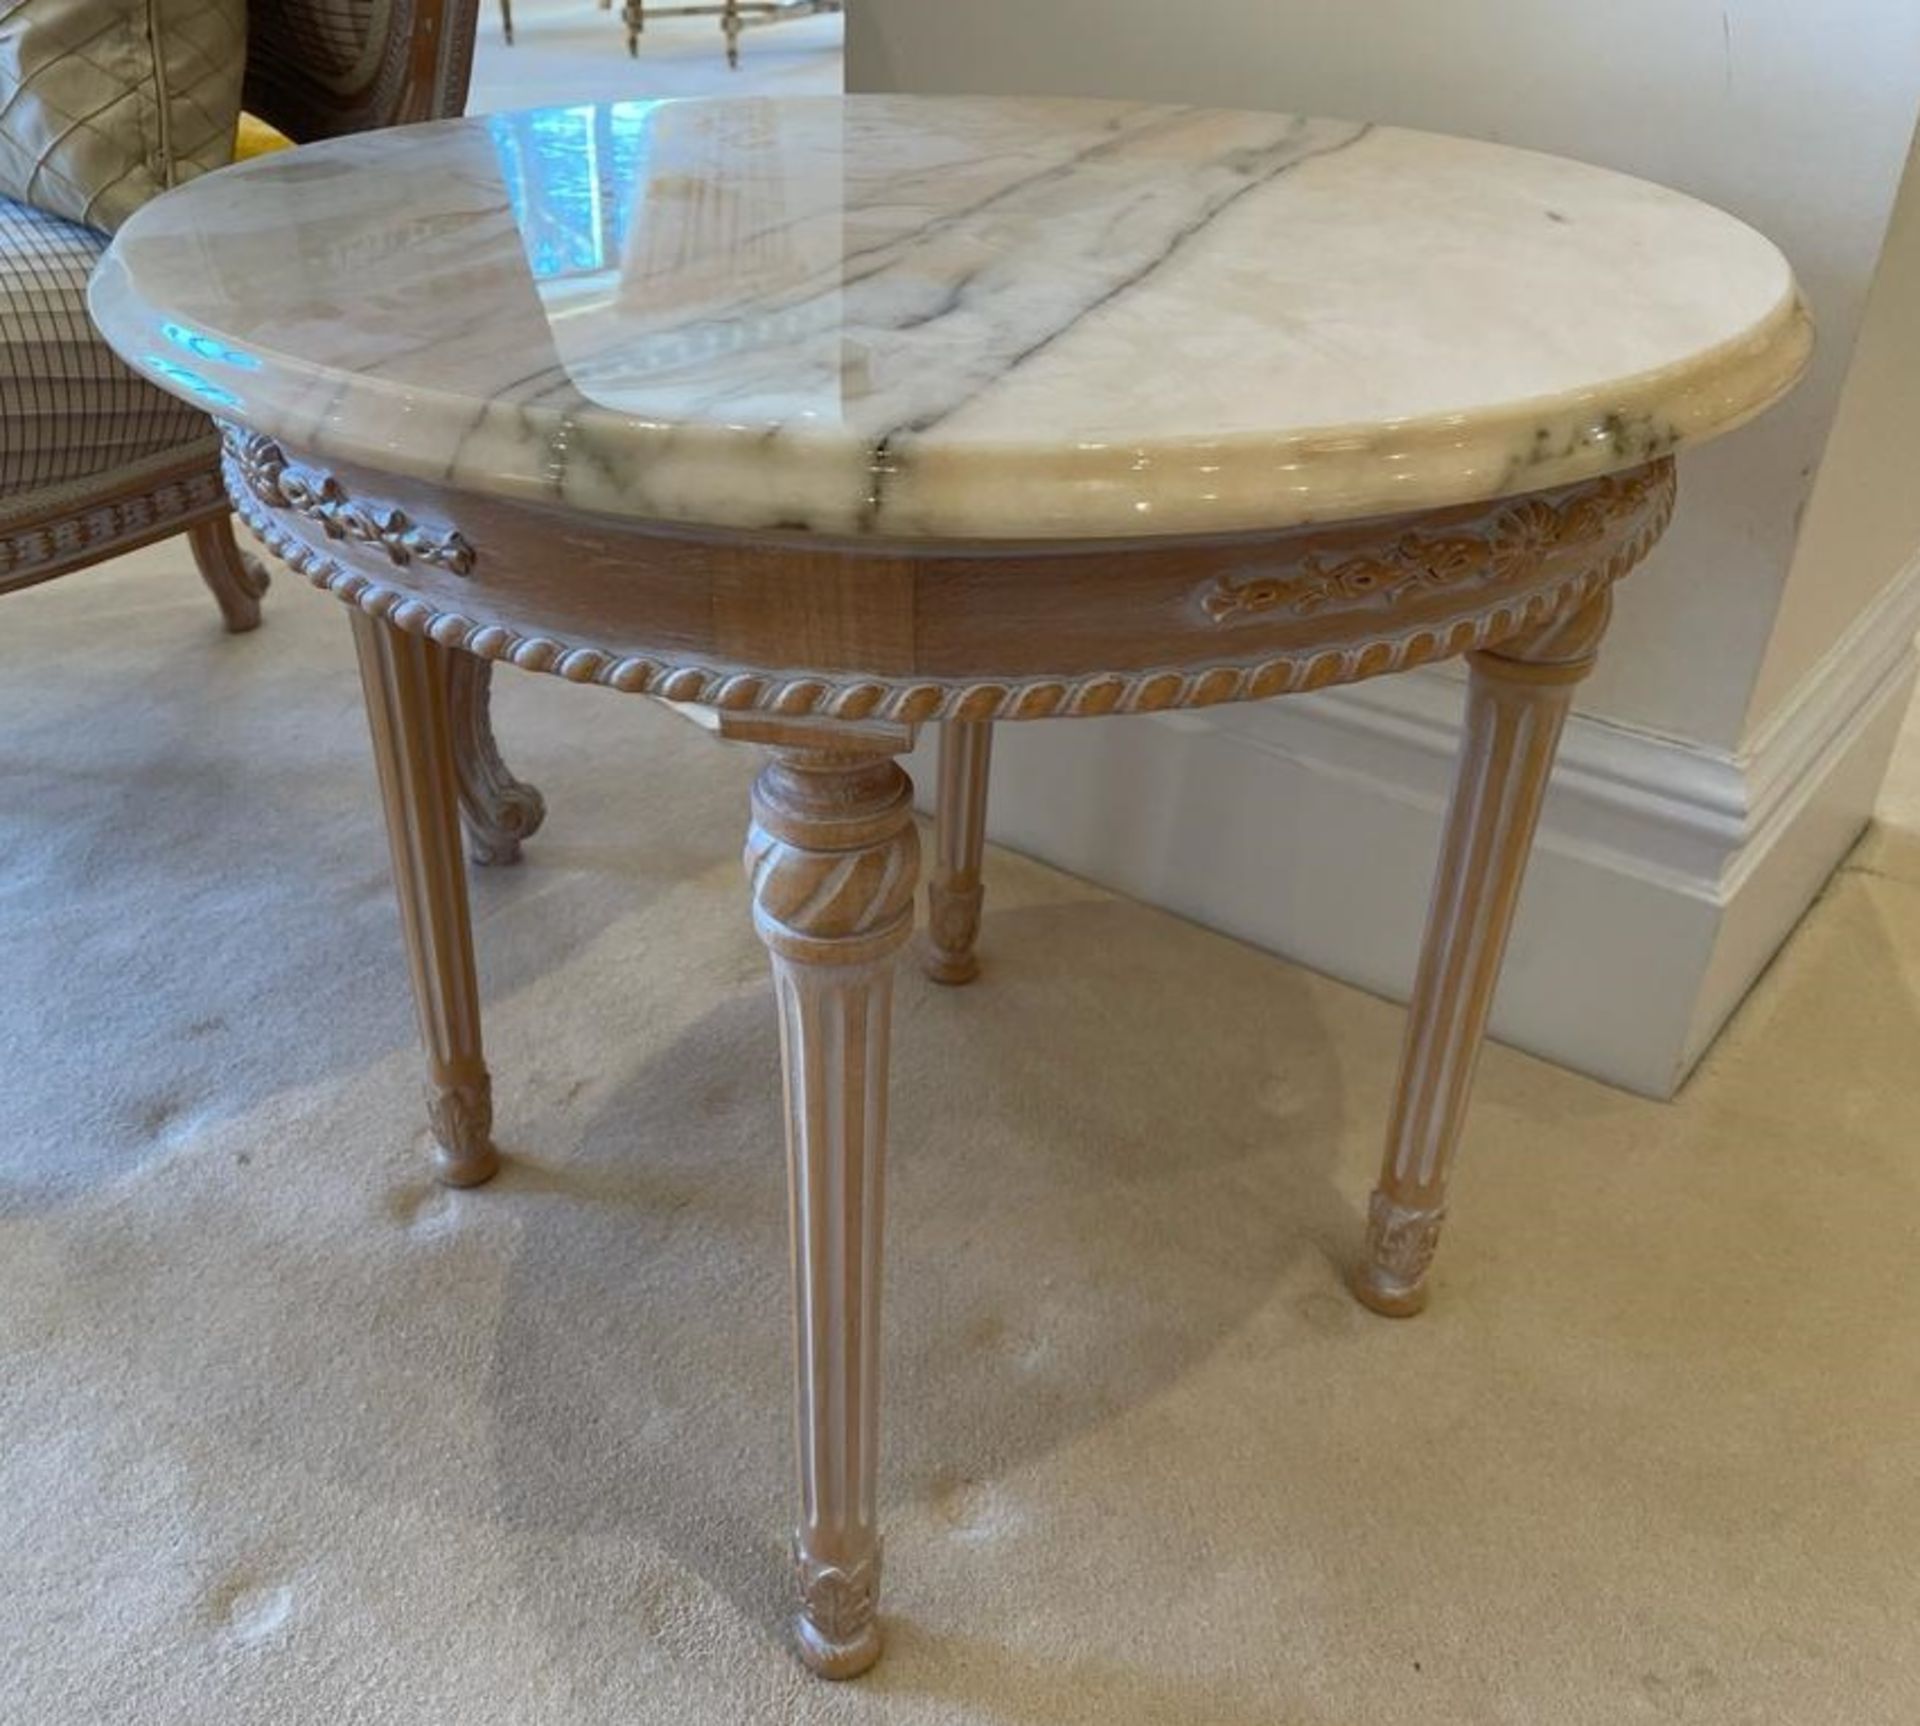 2 x French Shabby Chic Round Lamp Tables With Marble Top and Ornate Carved Base - Size: H50 x W60 - Image 8 of 8